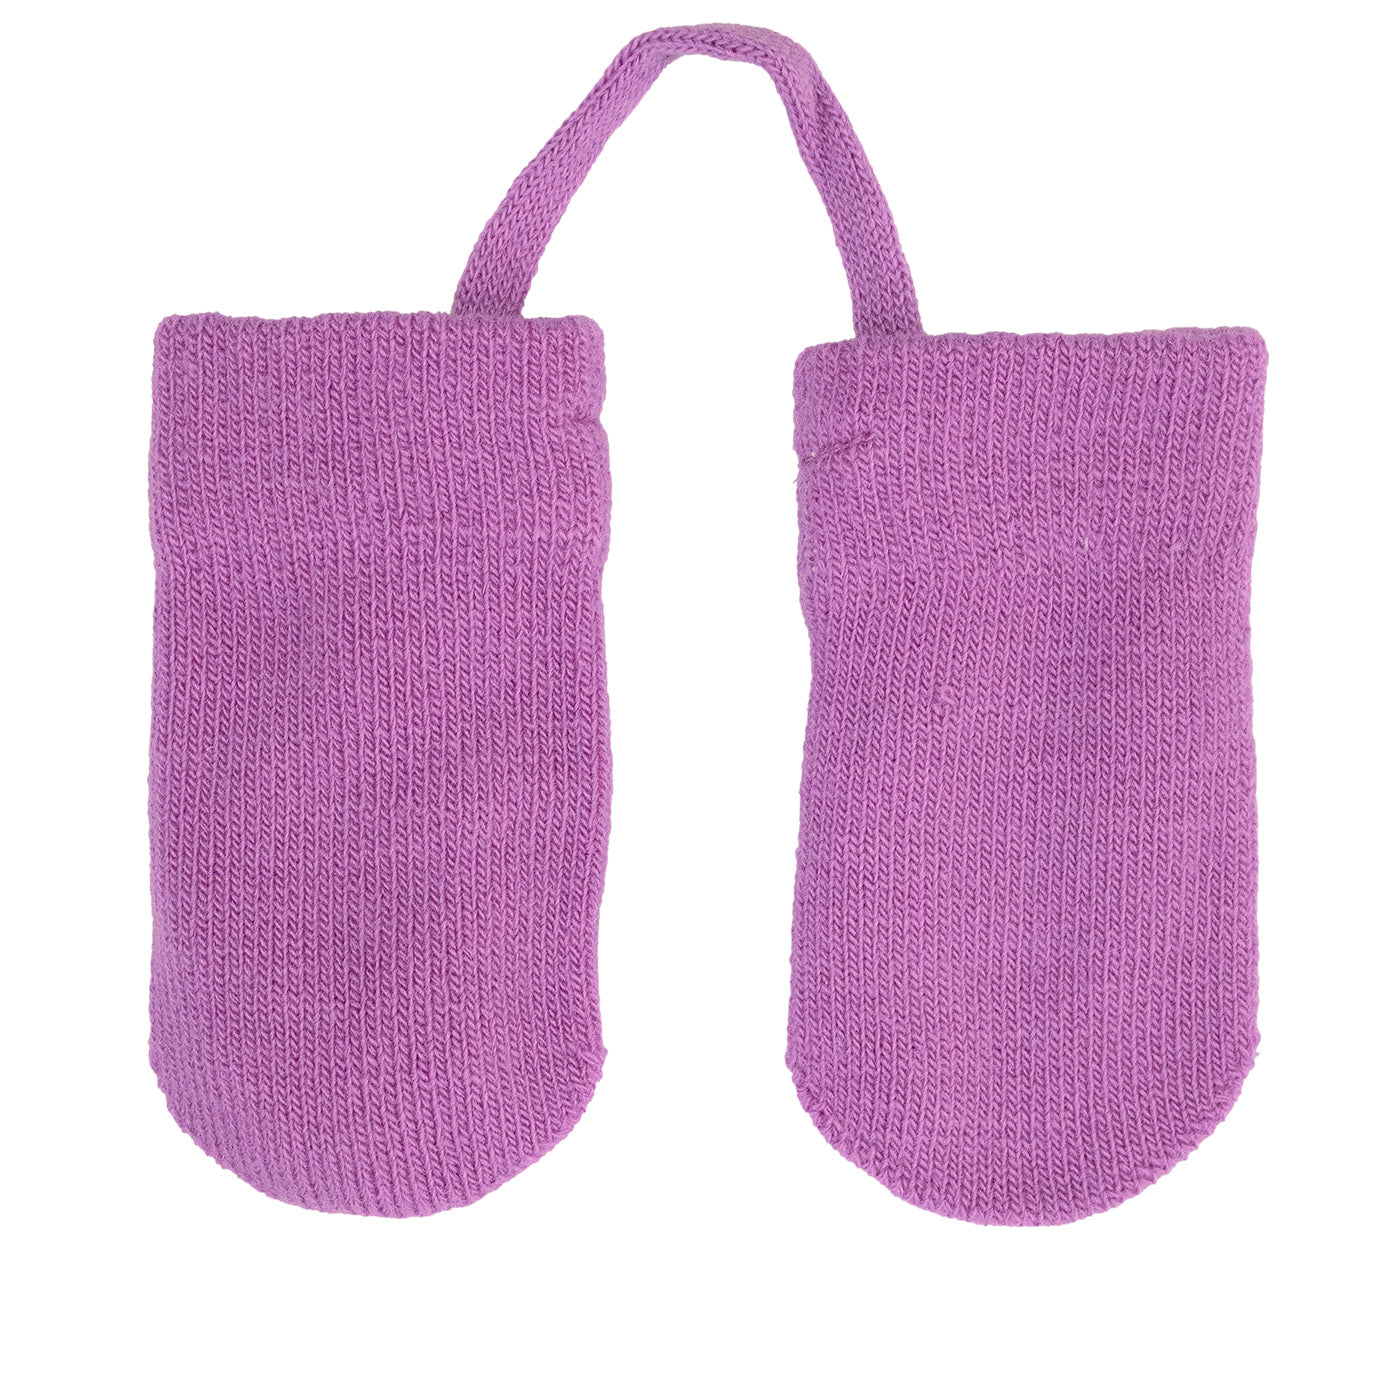 Knitted Baby Gloves - Fuchsia